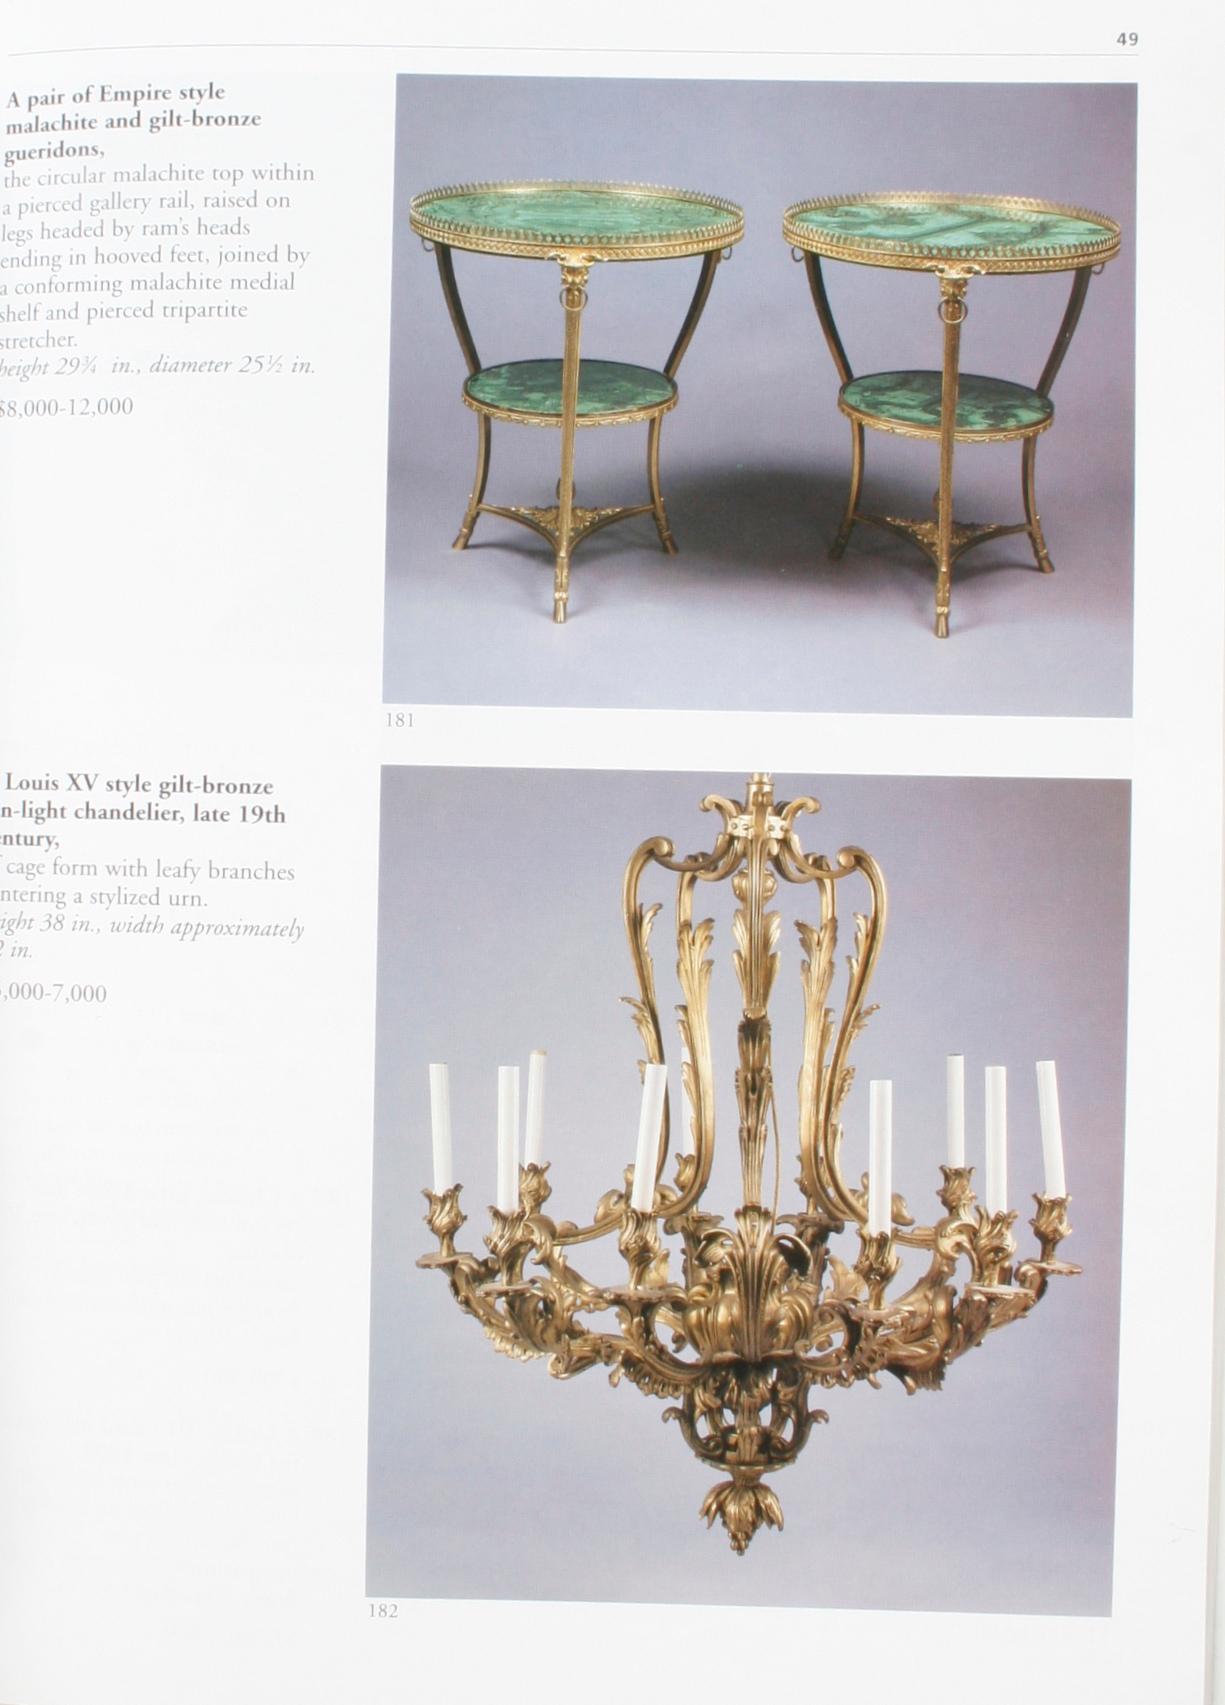 Sotheby's: French Furniture, Works of Art and Paintings, Mary & E.R. Albert Jr 1